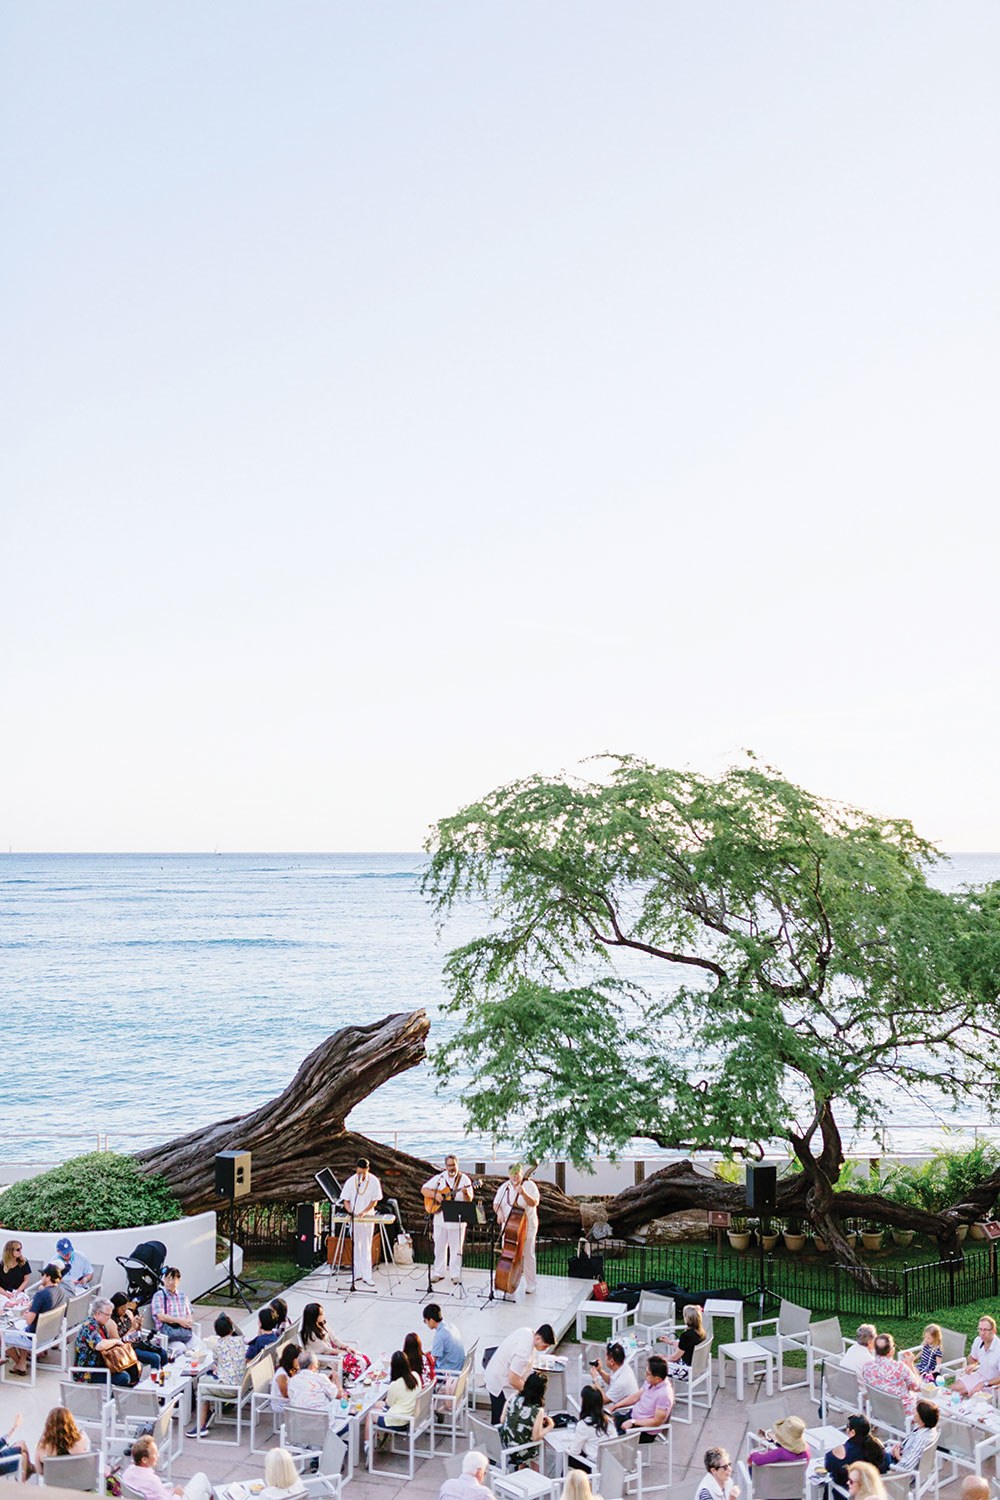 Trio band dress in white play for a crowd in front of a tree and ocean.